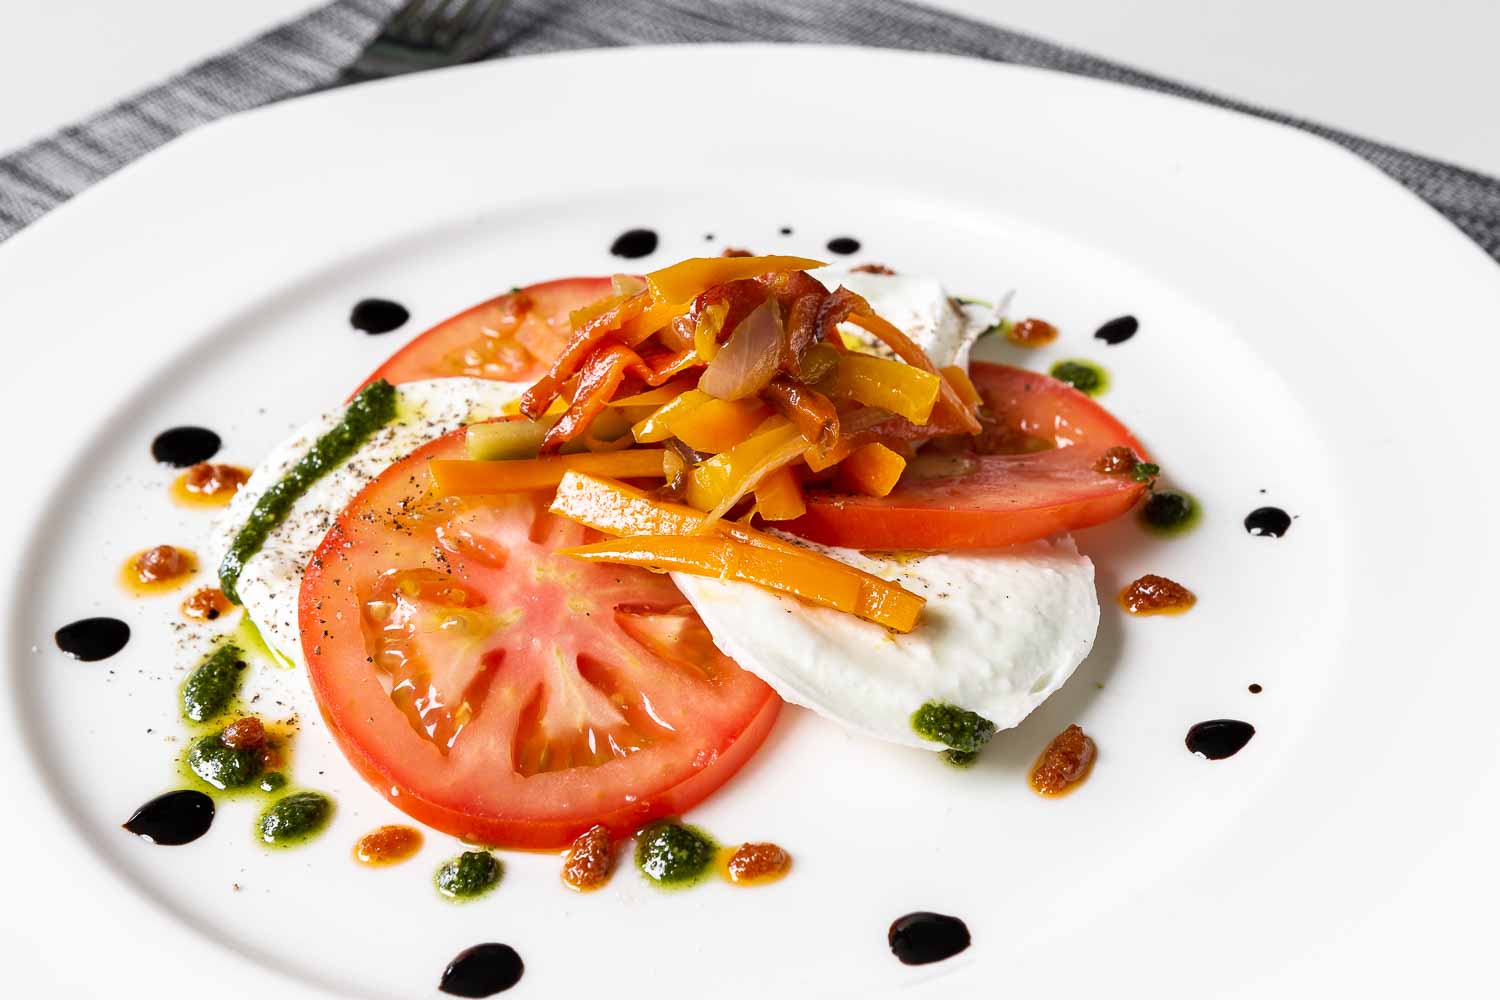 Caprese salad with sauteed vegetables and thyme